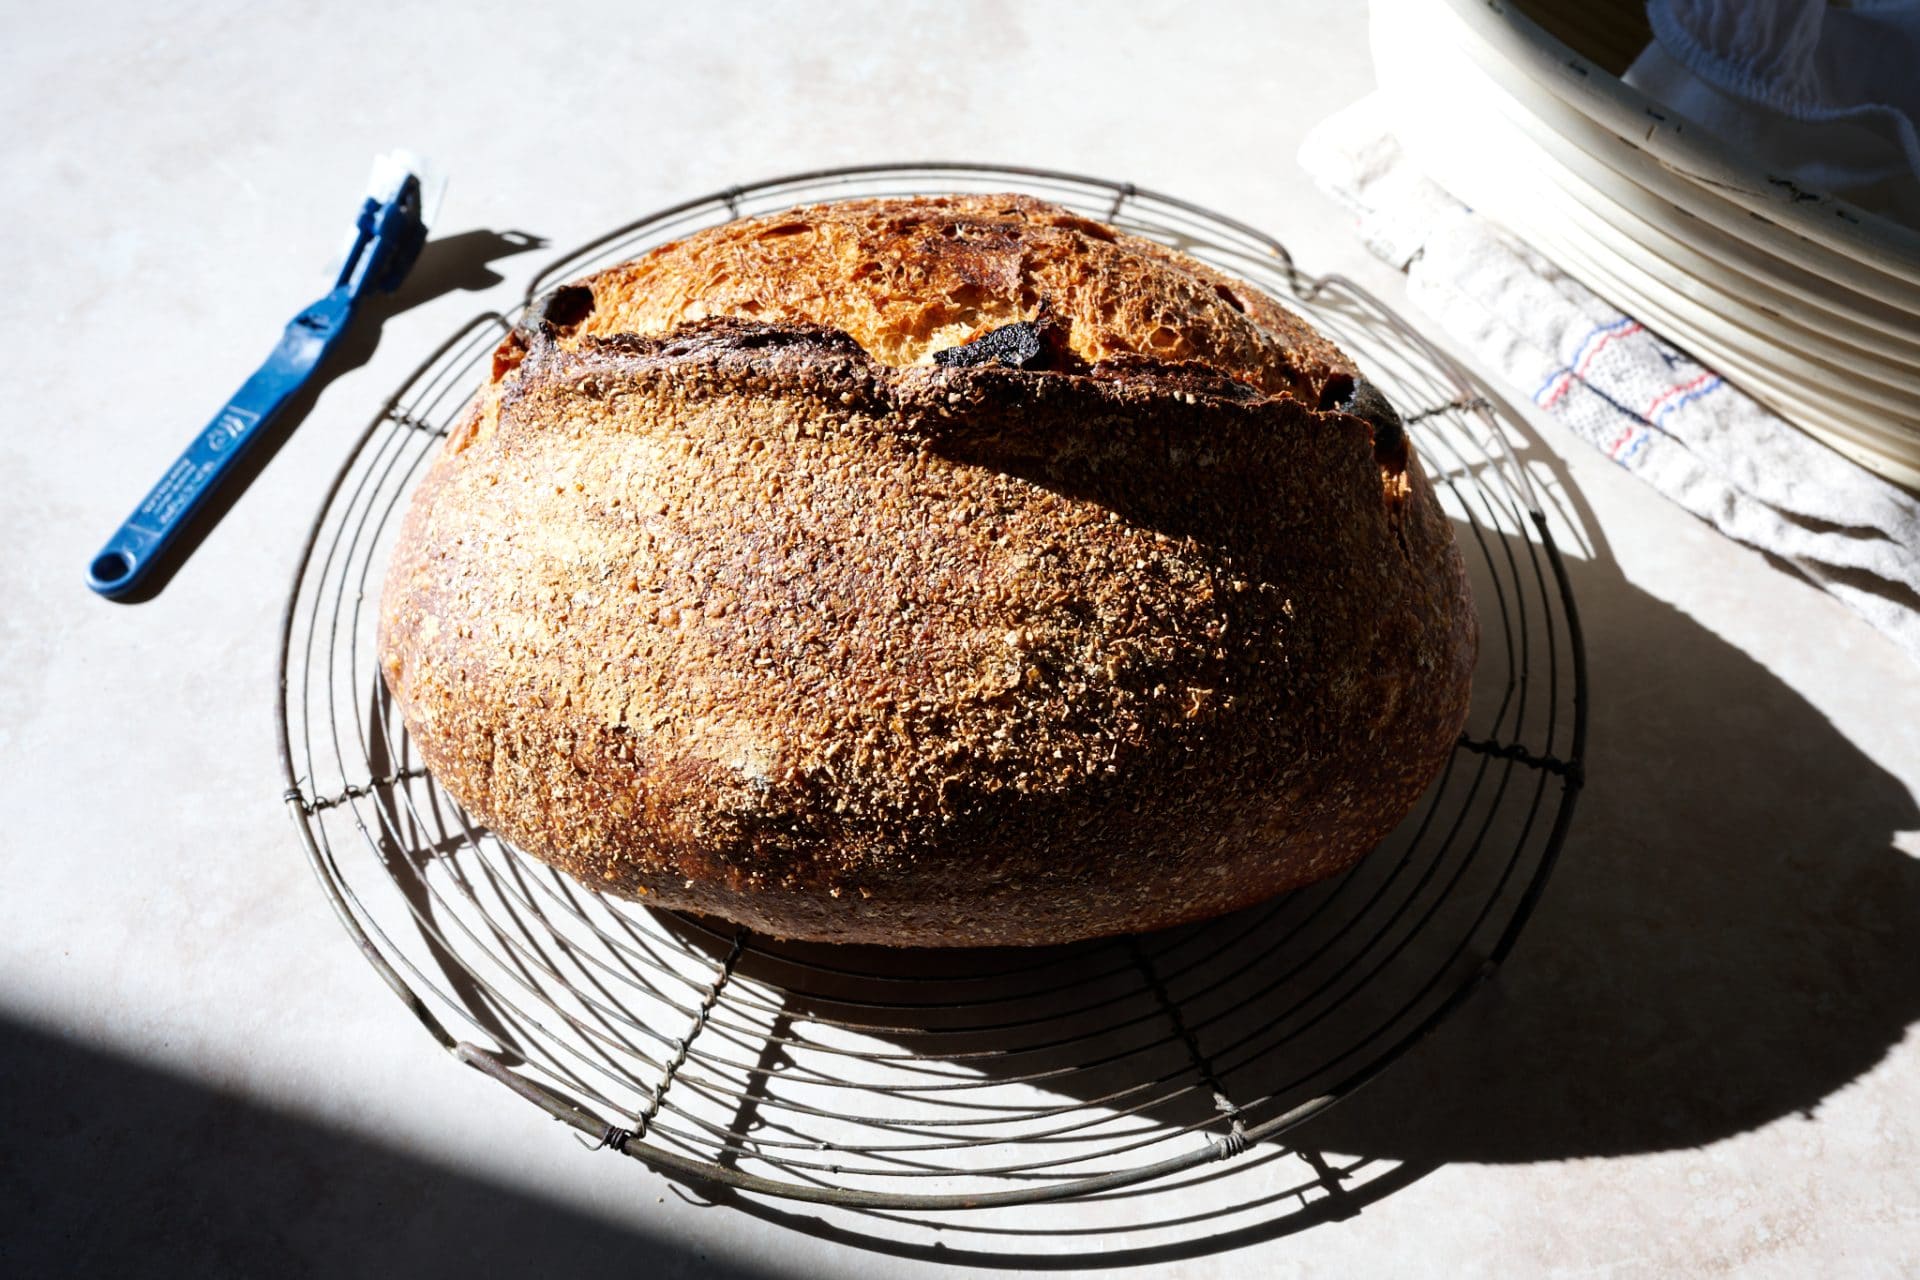 Apricot and thyme sourdough with wheat bran topping